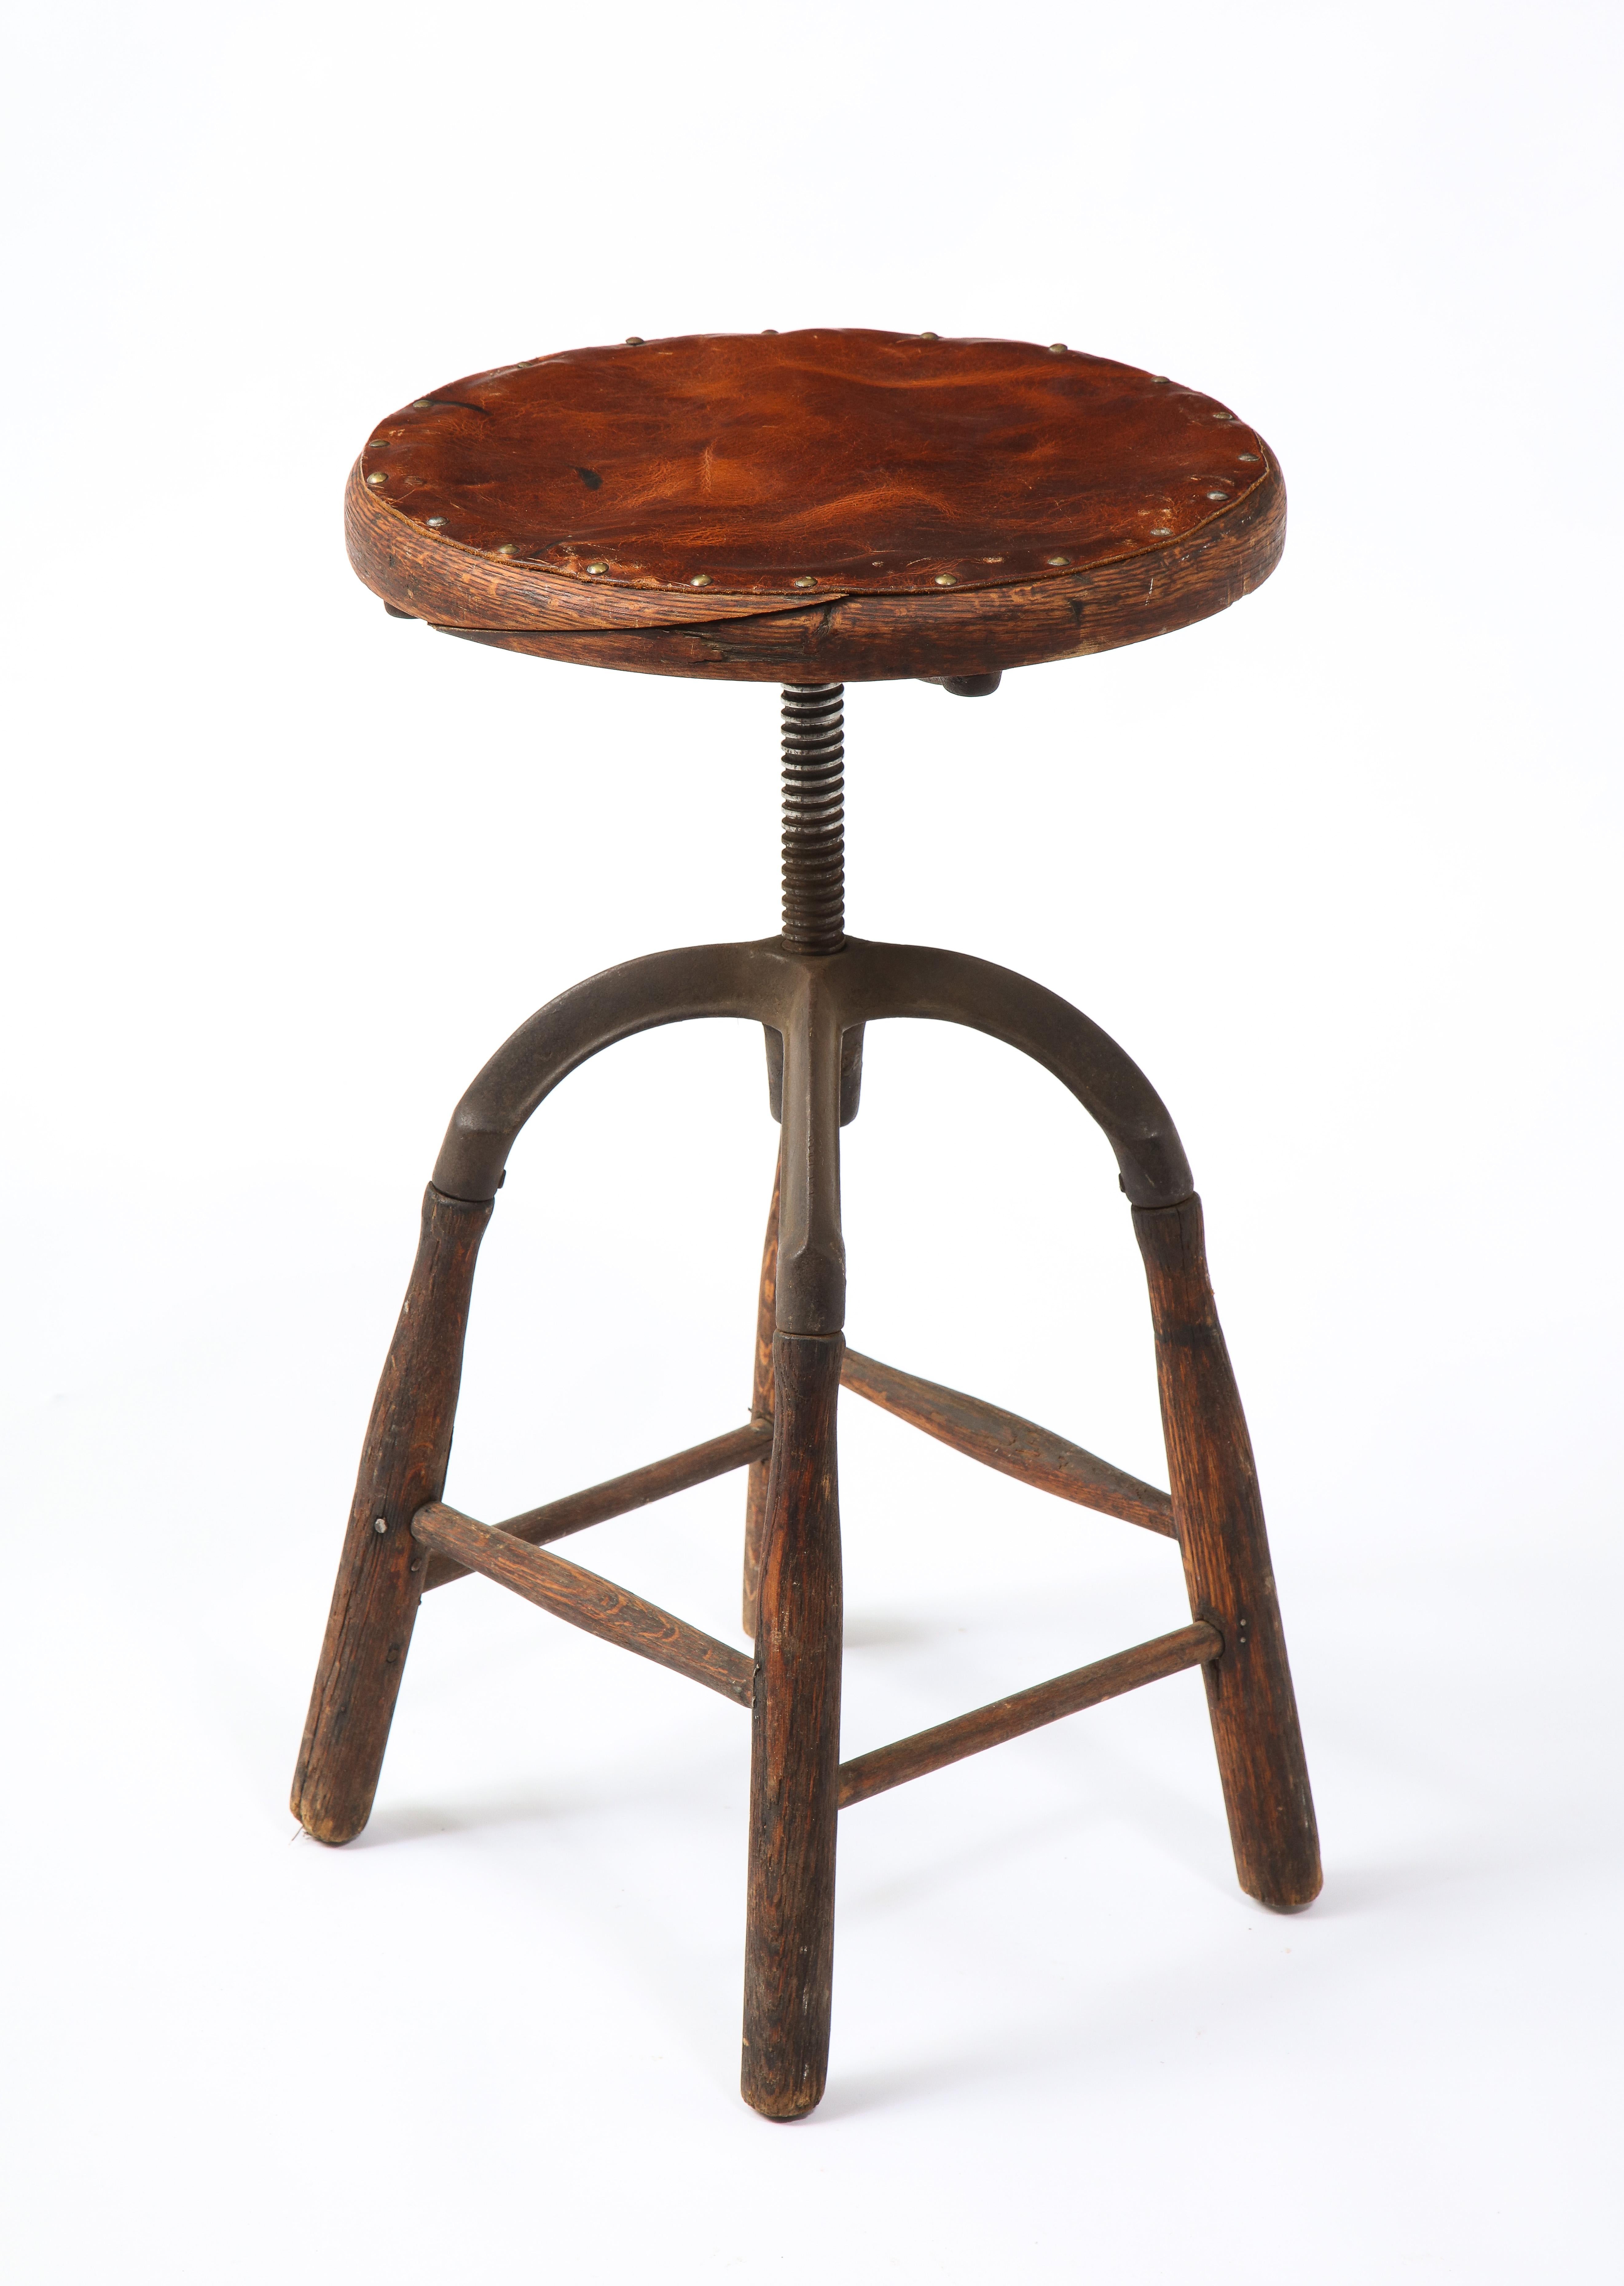 Leather Early Industrial Work Stool, USA, 1940's For Sale